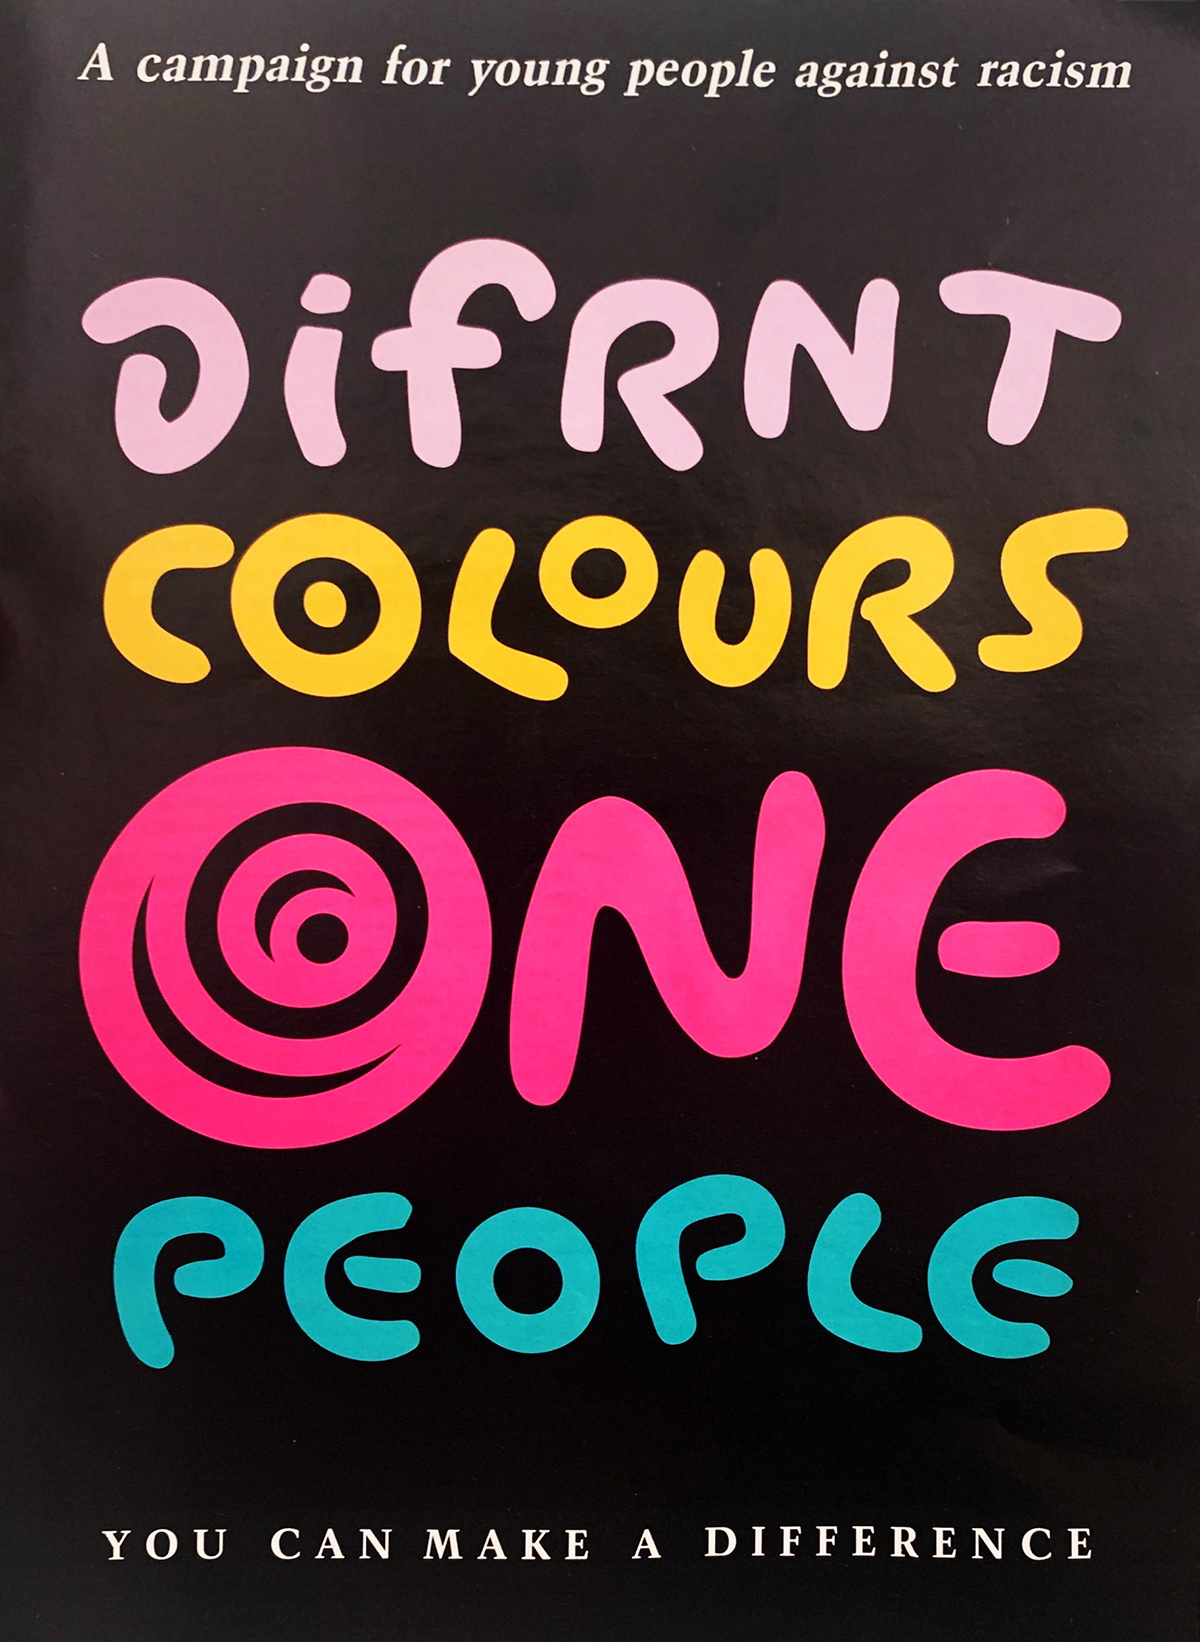 Campaign material from the Human Rights and Equal Opportunity Commission’s Different Colours One People campaign (1993)One People